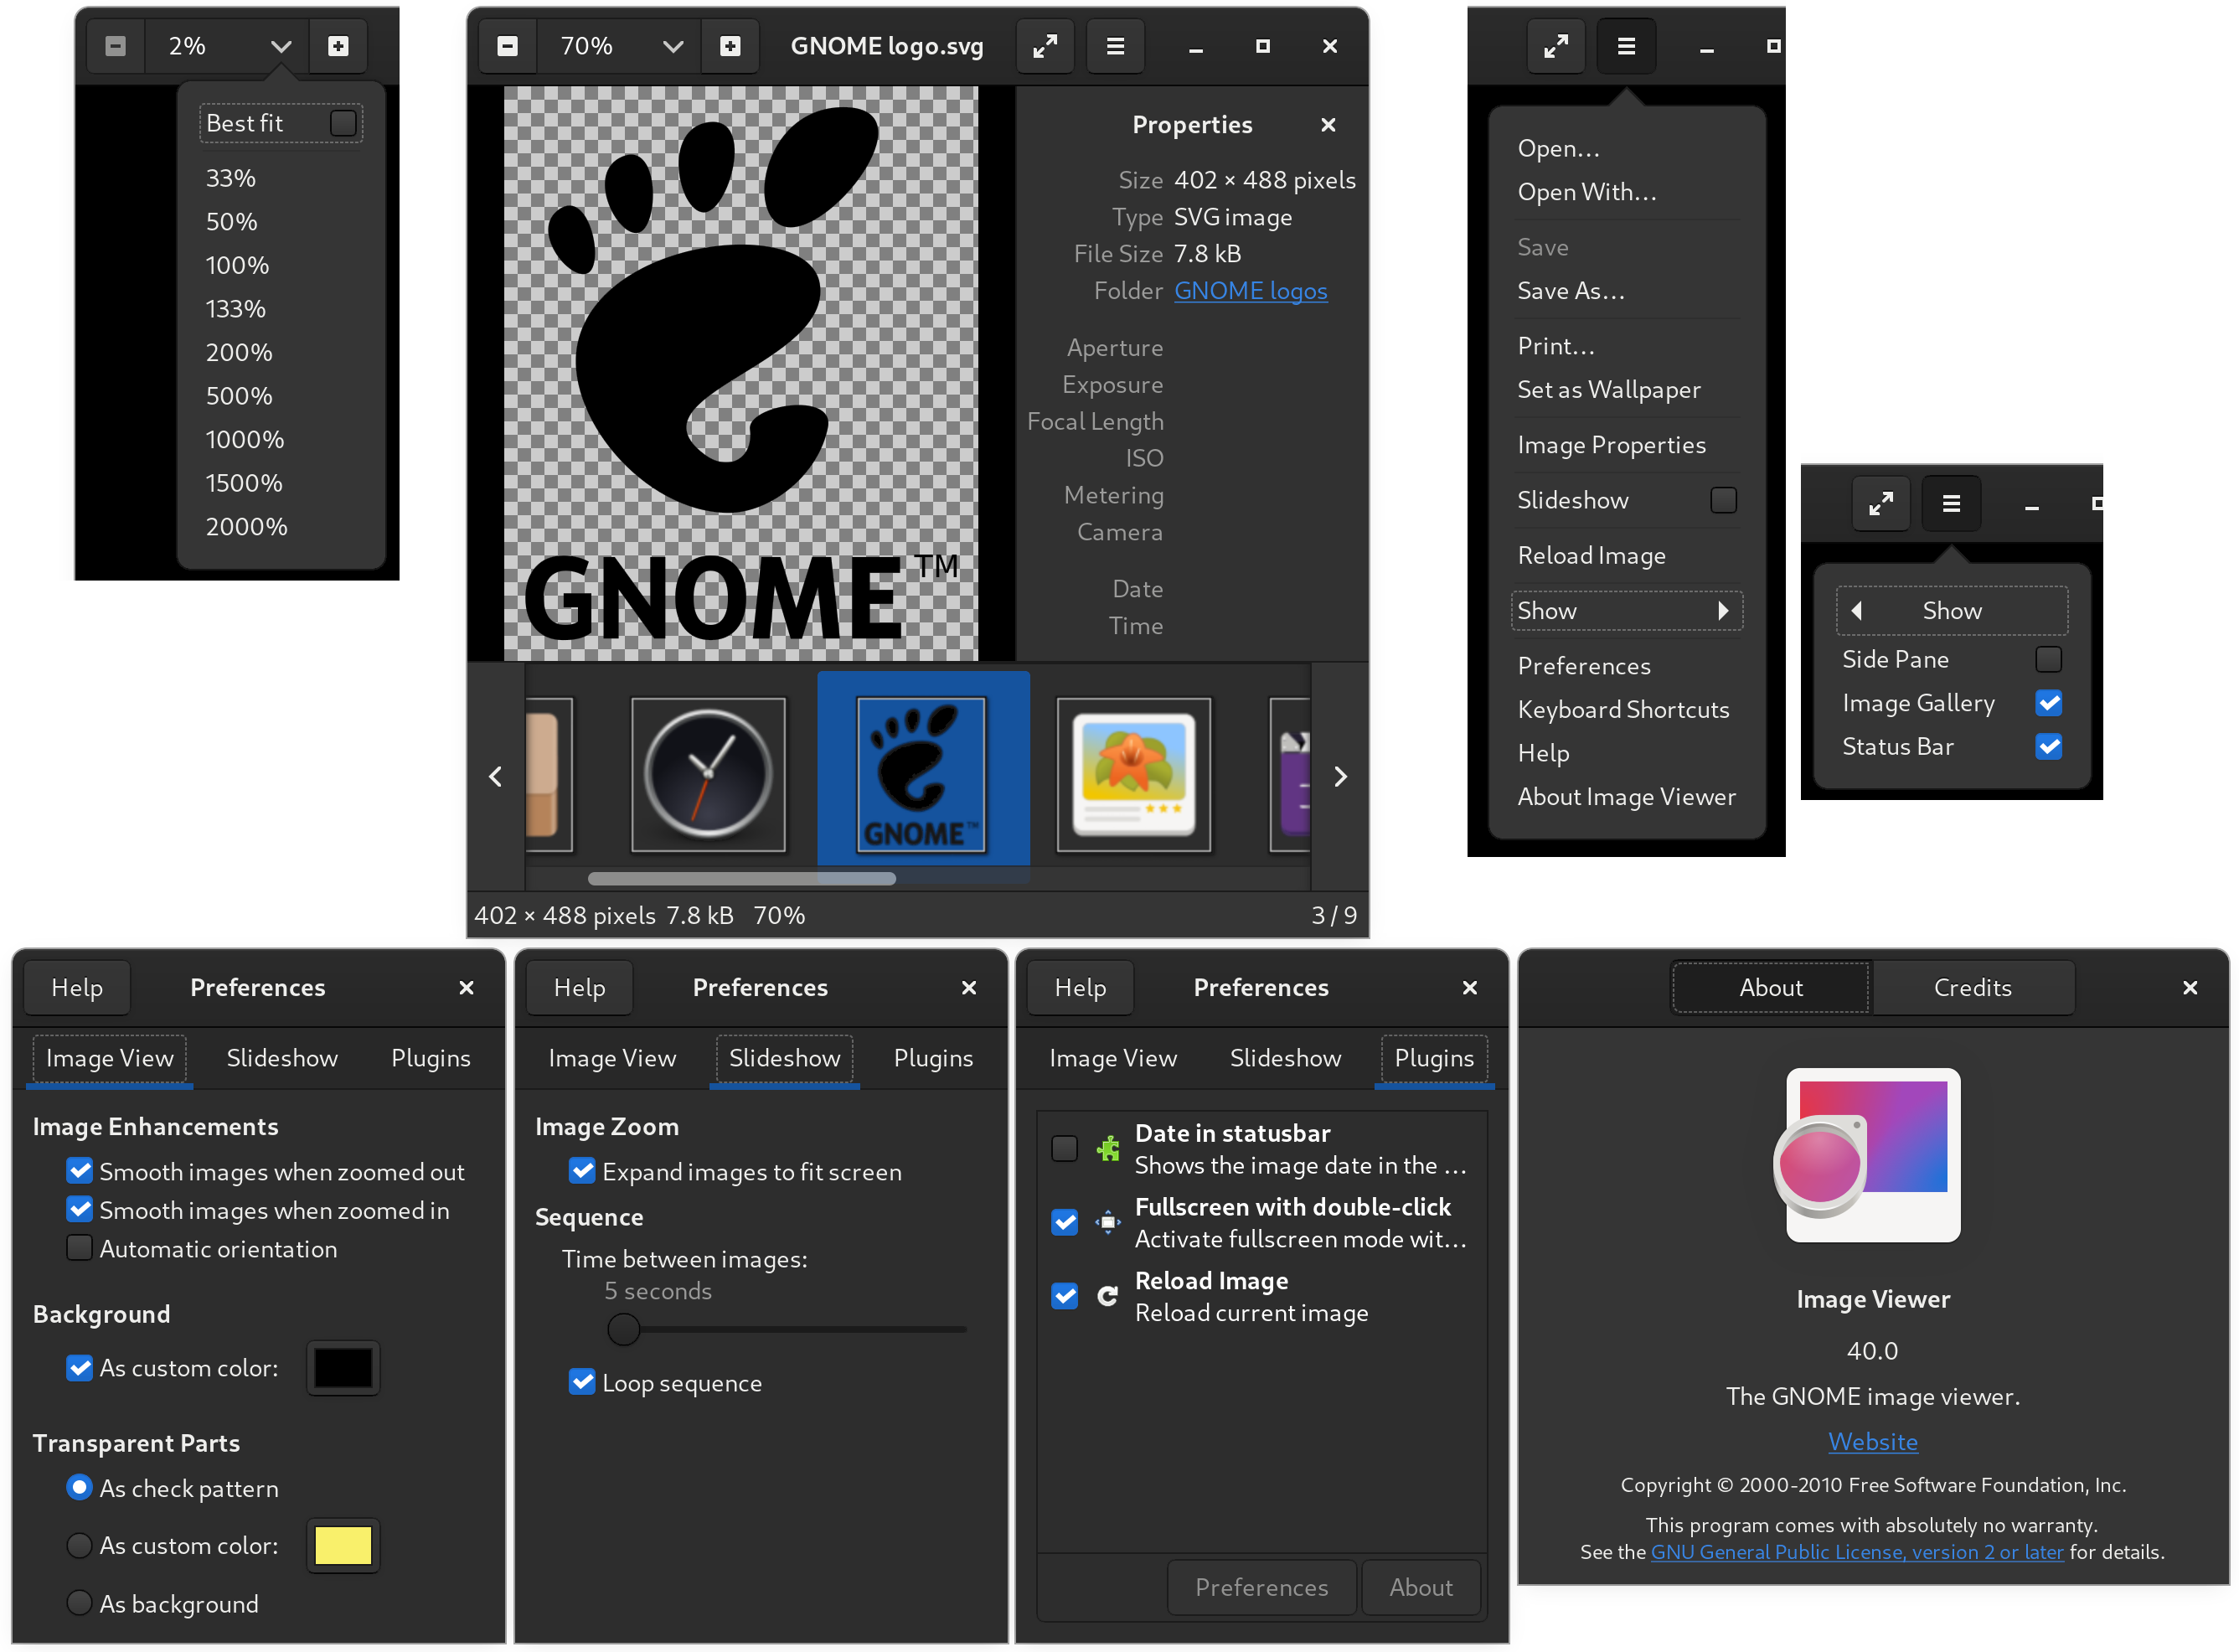 Image Viewing Software: Tails.exe pictures can be viewed using various software, including Windows Photos, macOS Preview, and Eye of GNOME.
Web Browsers: Tails.exe pictures can be displayed in web browsers such as Google Chrome, Mozilla Firefox, and Safari.